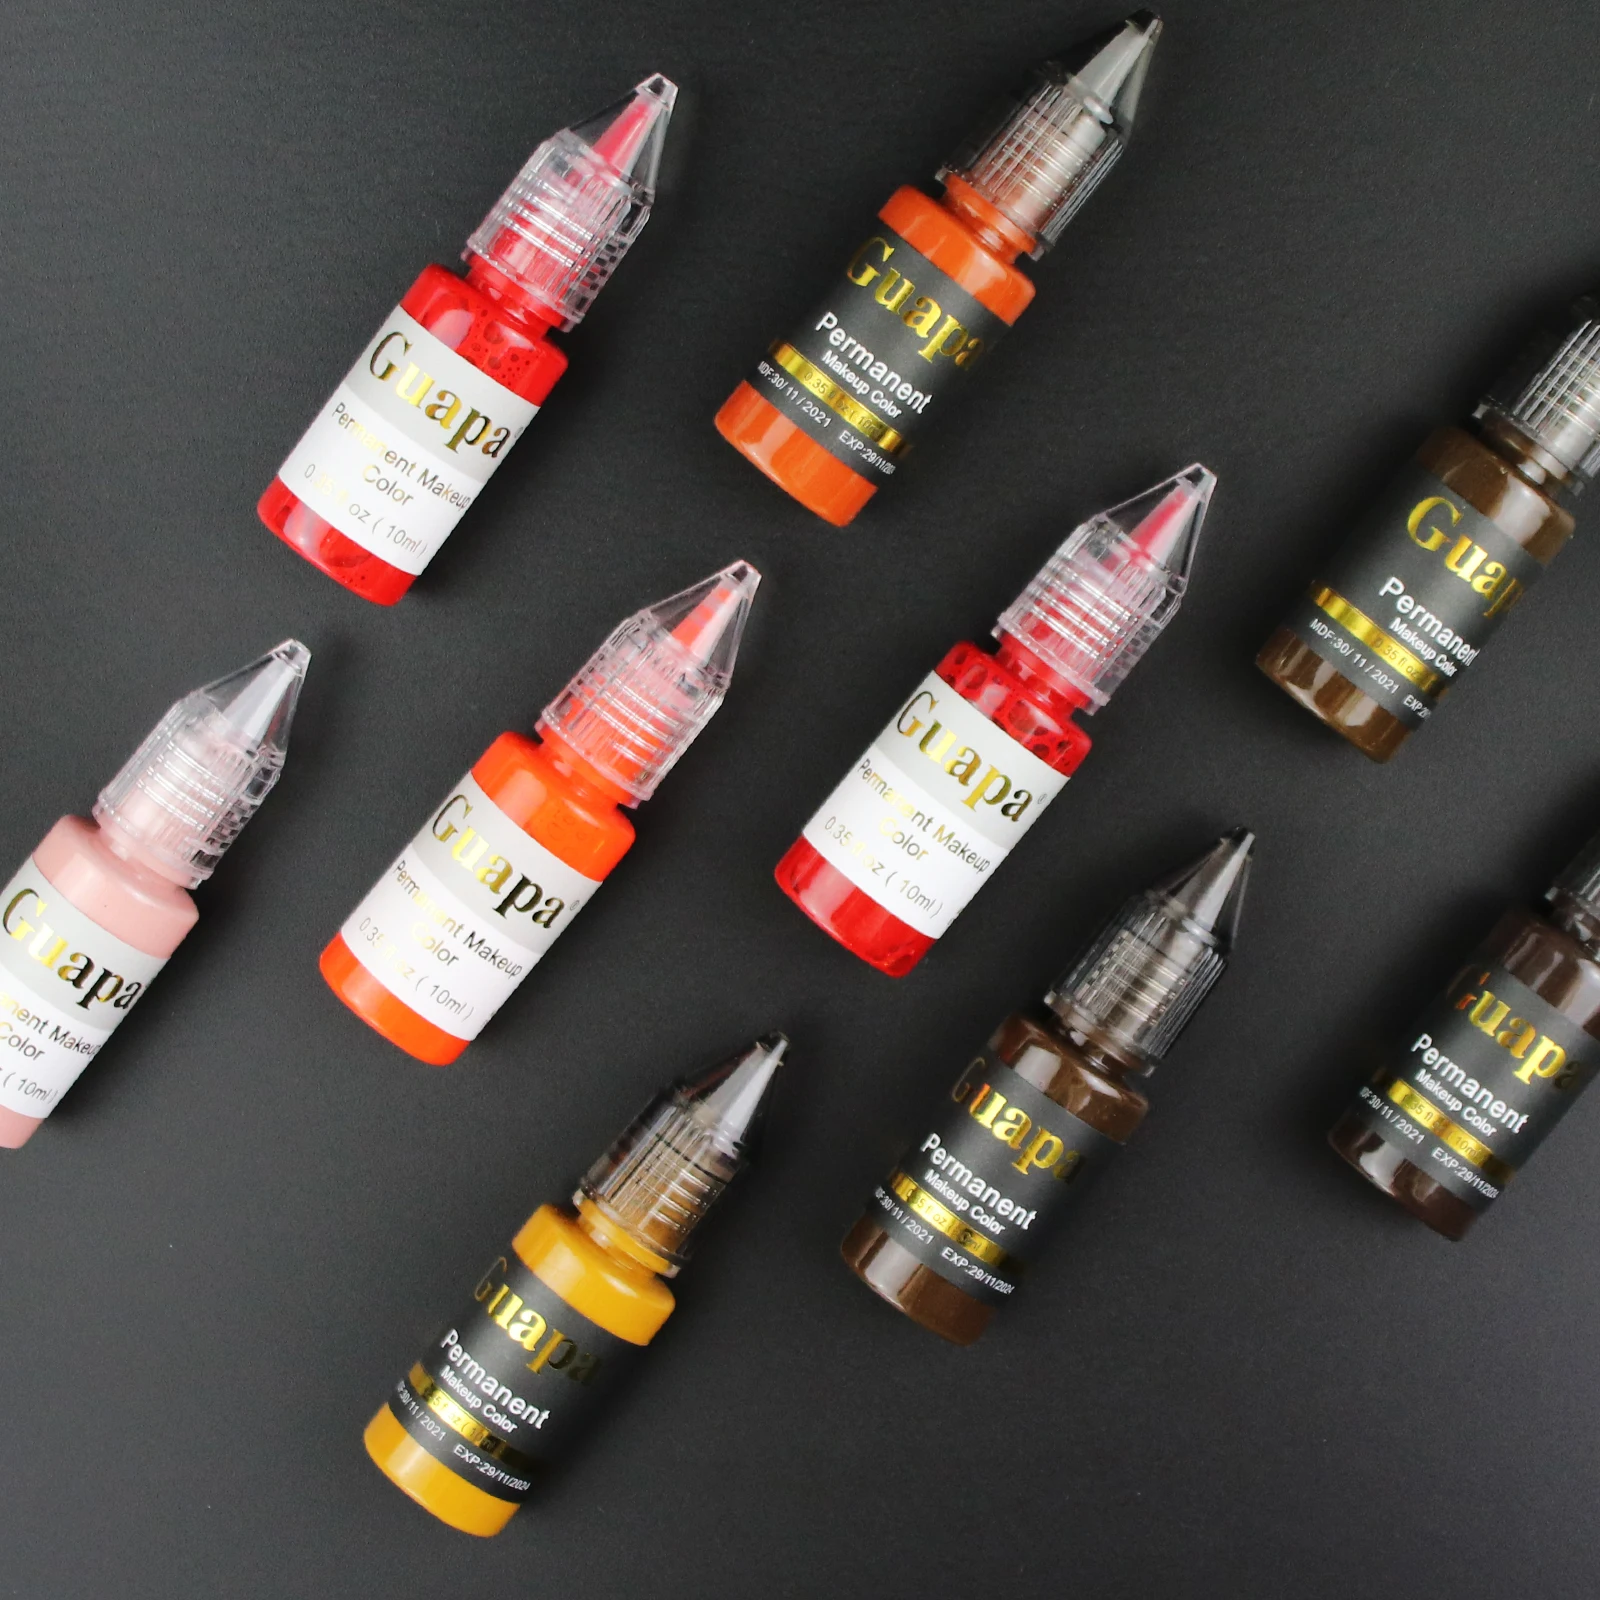 

Wholesale 10ml /Bottle Tattoo Ink Pigment For Permanent Makeup Eyebrow Eyeliner Lip Pigments Body Arts Paints Tattoo Ink